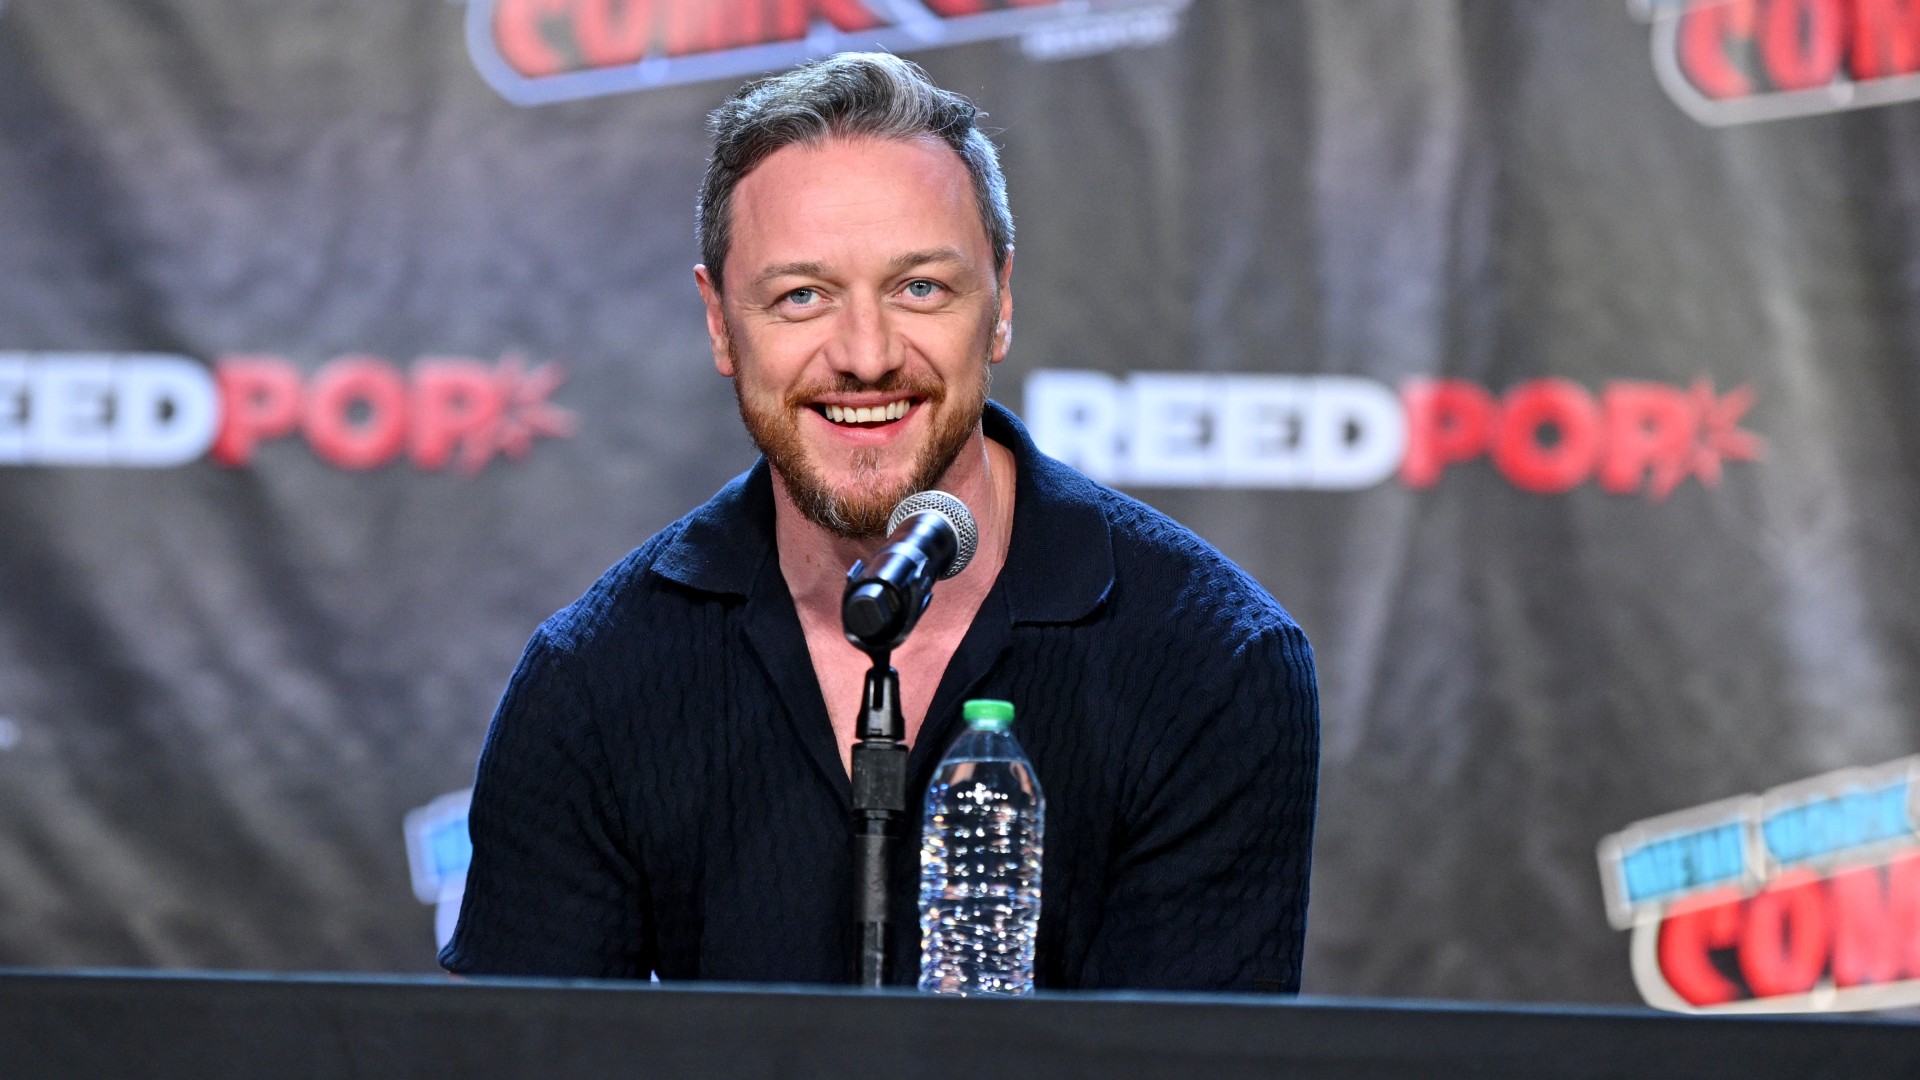 James McAvoy Discusses His 'X-Men' Franchise Future and Regrets